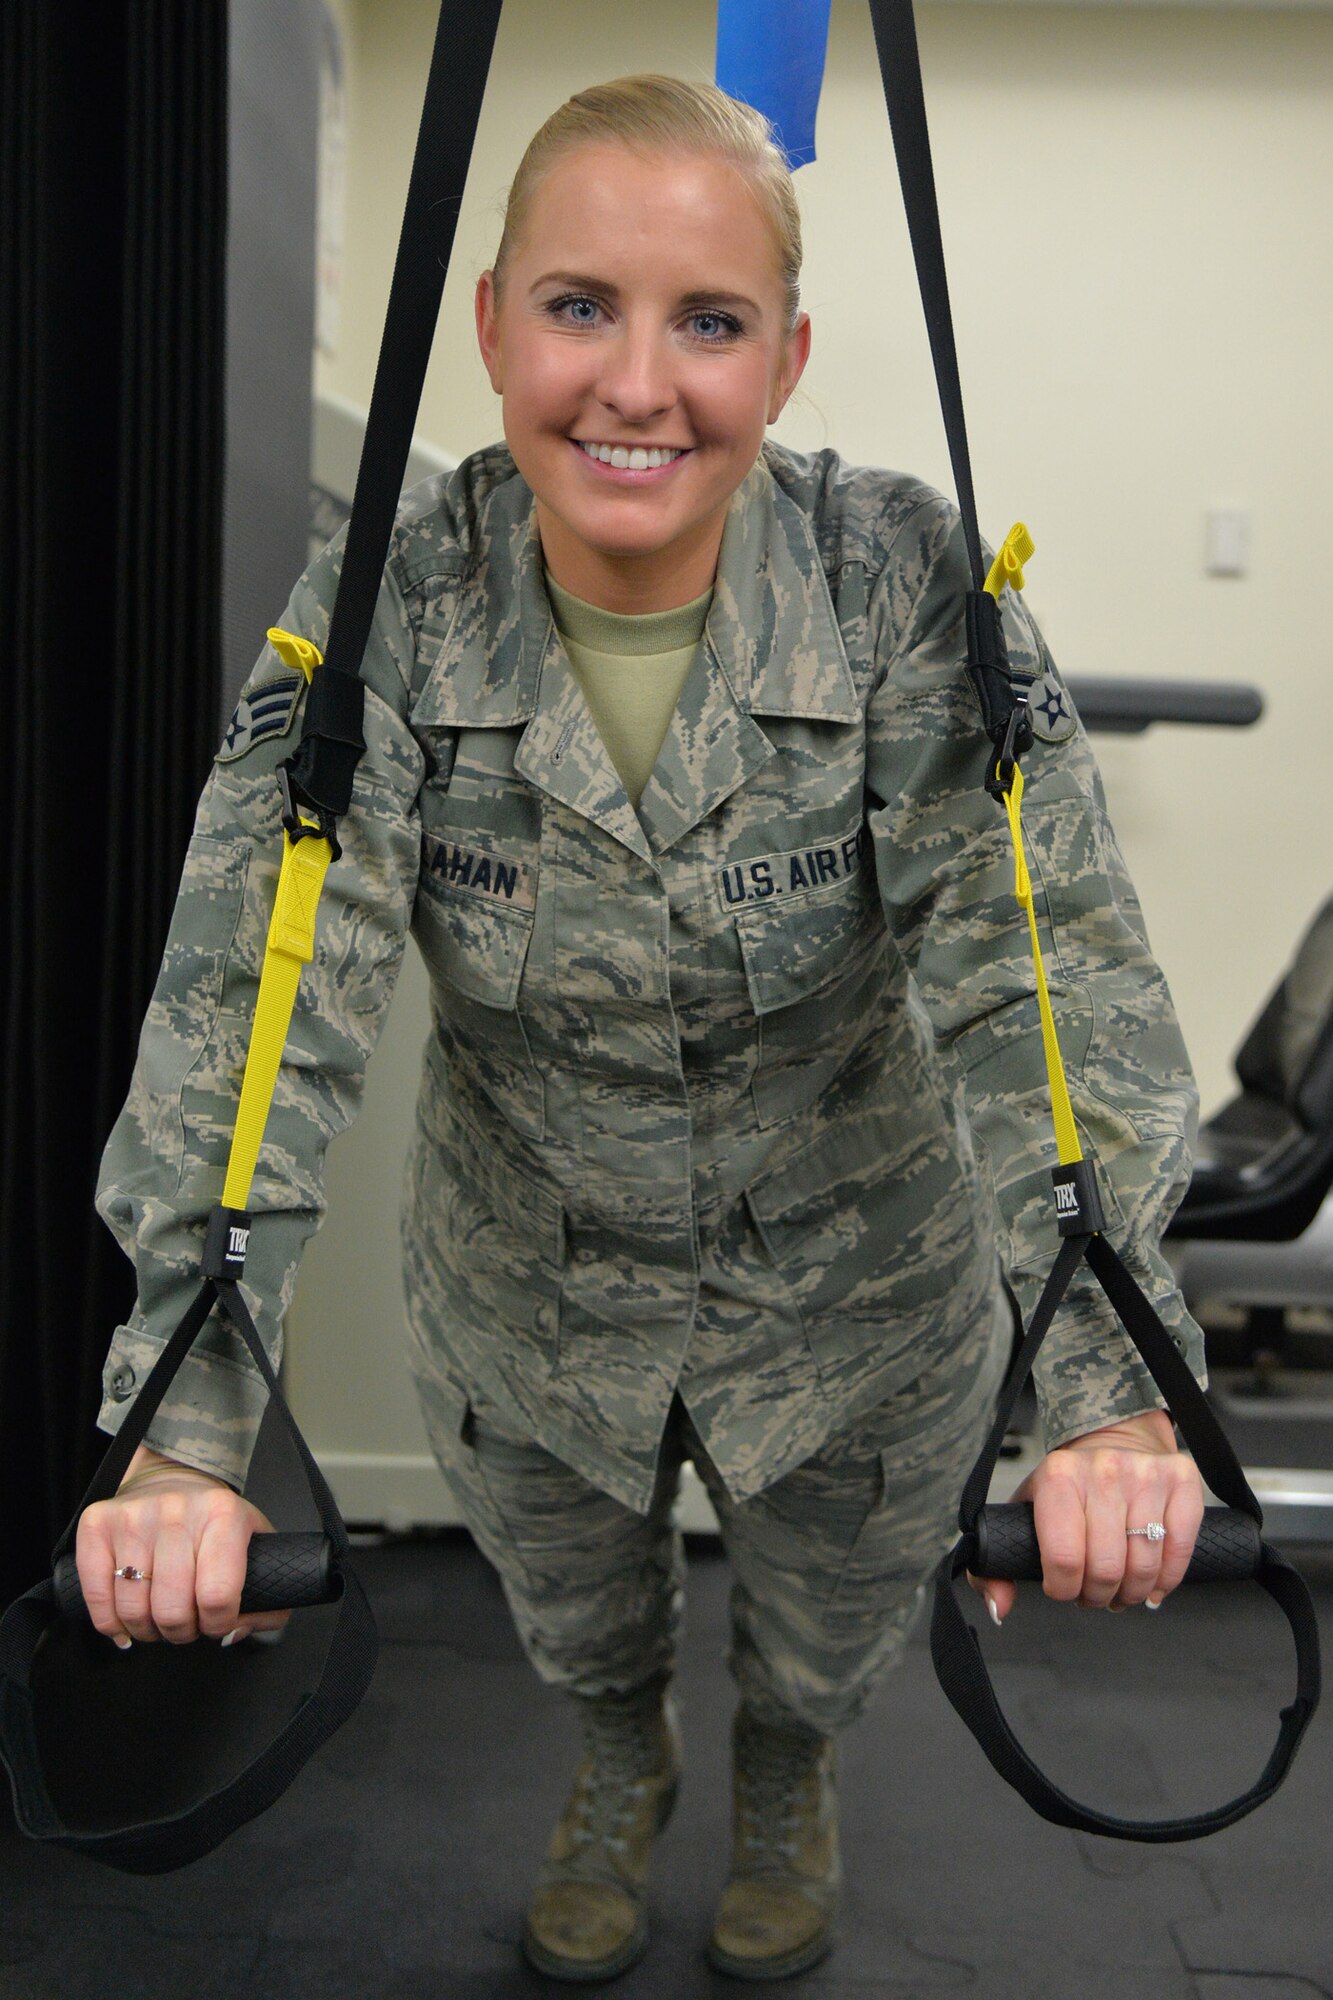 Senior Airman Kaitlyn Callahan, 341st Medical Operations Squadron physical therapy technician, poses for a photo Nov. 9, 2016, at Malmstrom Air Force Base, Mont. Callahan is responsible for assisting Airmen in rehabilitation who have been injured. She also helps prevent Airmen from causing further injuries by educating them on proper exercise form. (U.S. Air Force photo/Airman 1st Class Daniel Brosam)